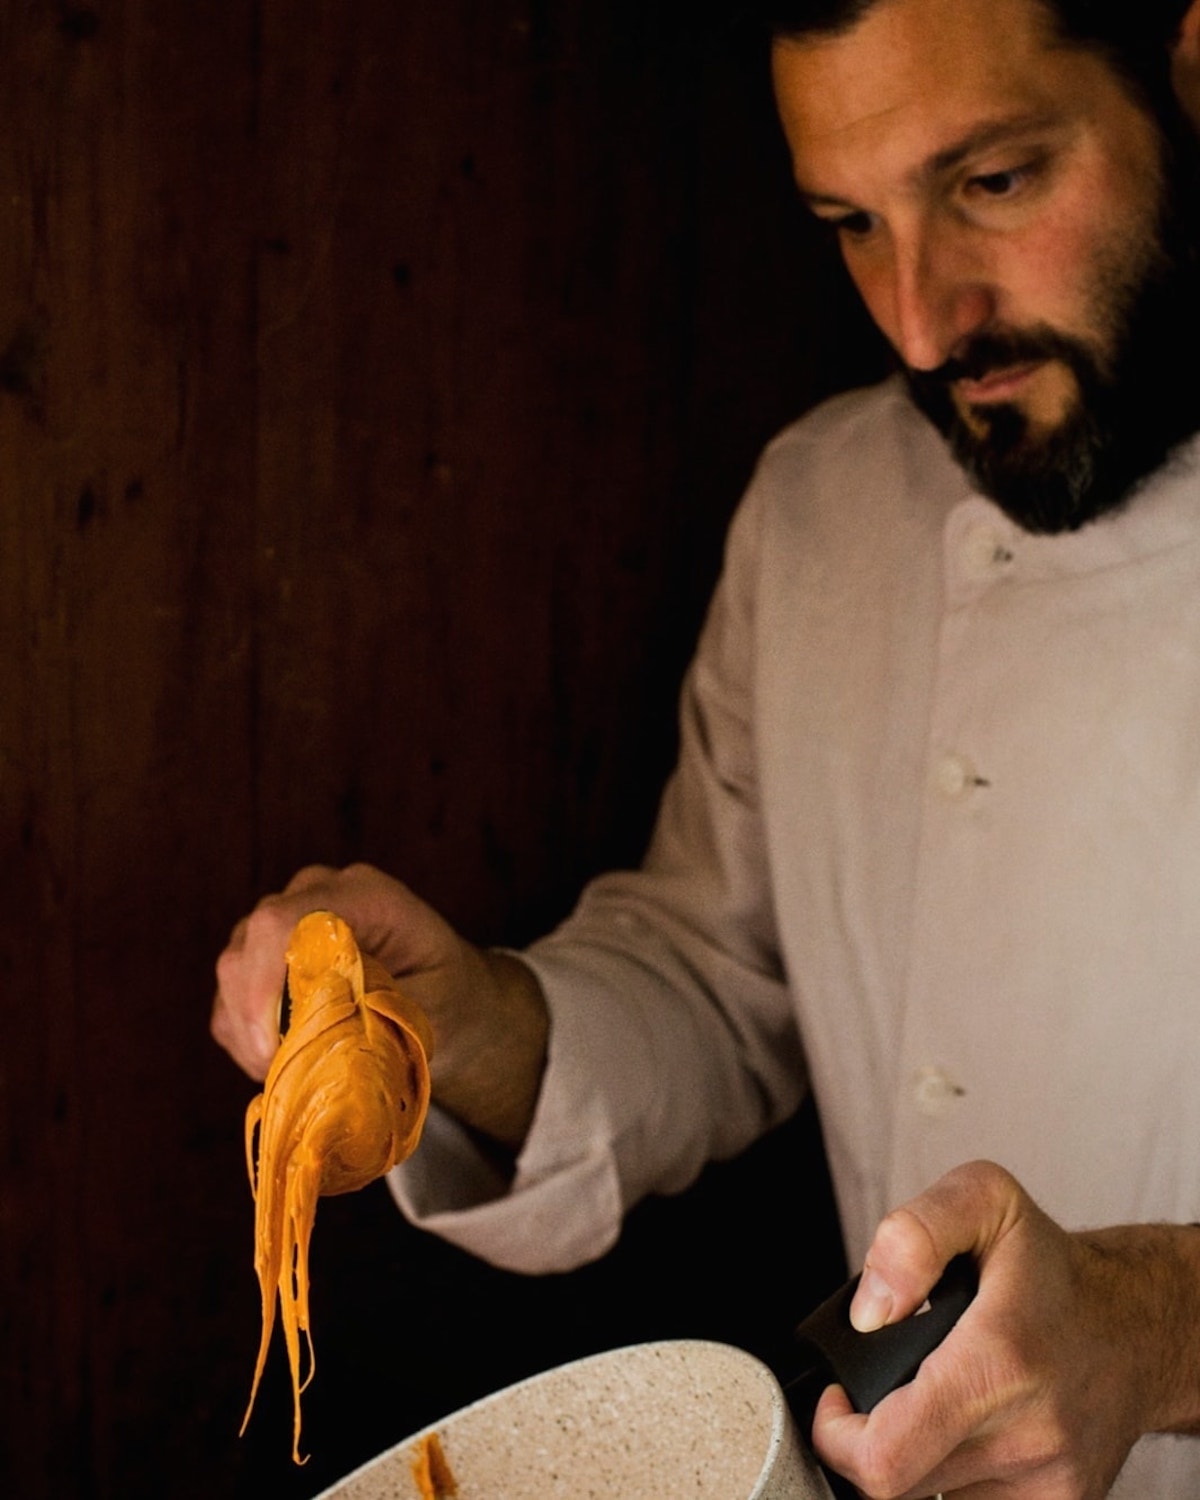 A man in a white chef's coat scooping brown ice cream